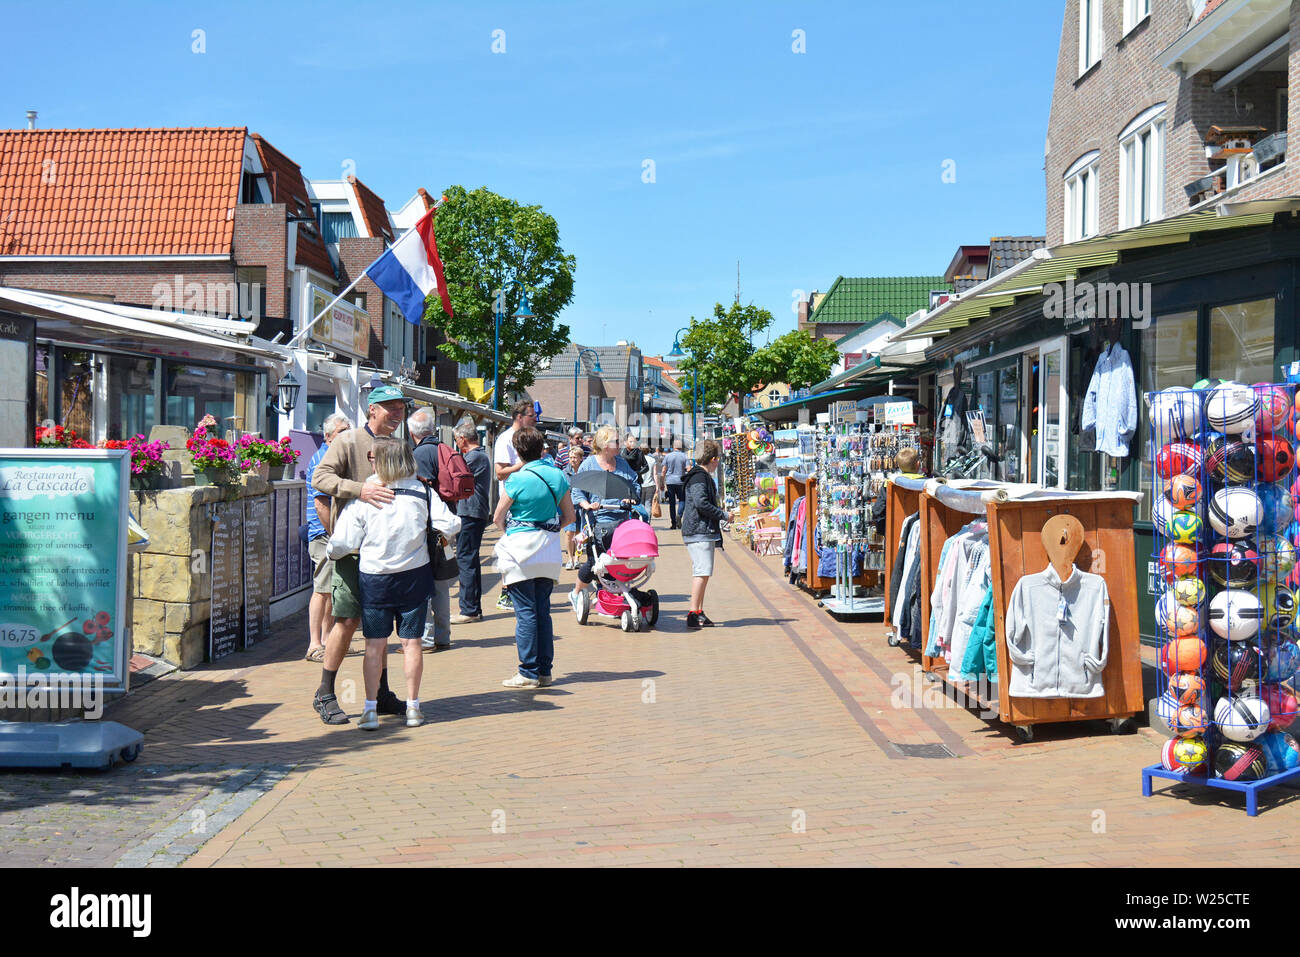 De Koog, Netherlands  Popular city center with small tourist shops in De Koog on the island Texel in the Netherlands with people shopping Stock Photo